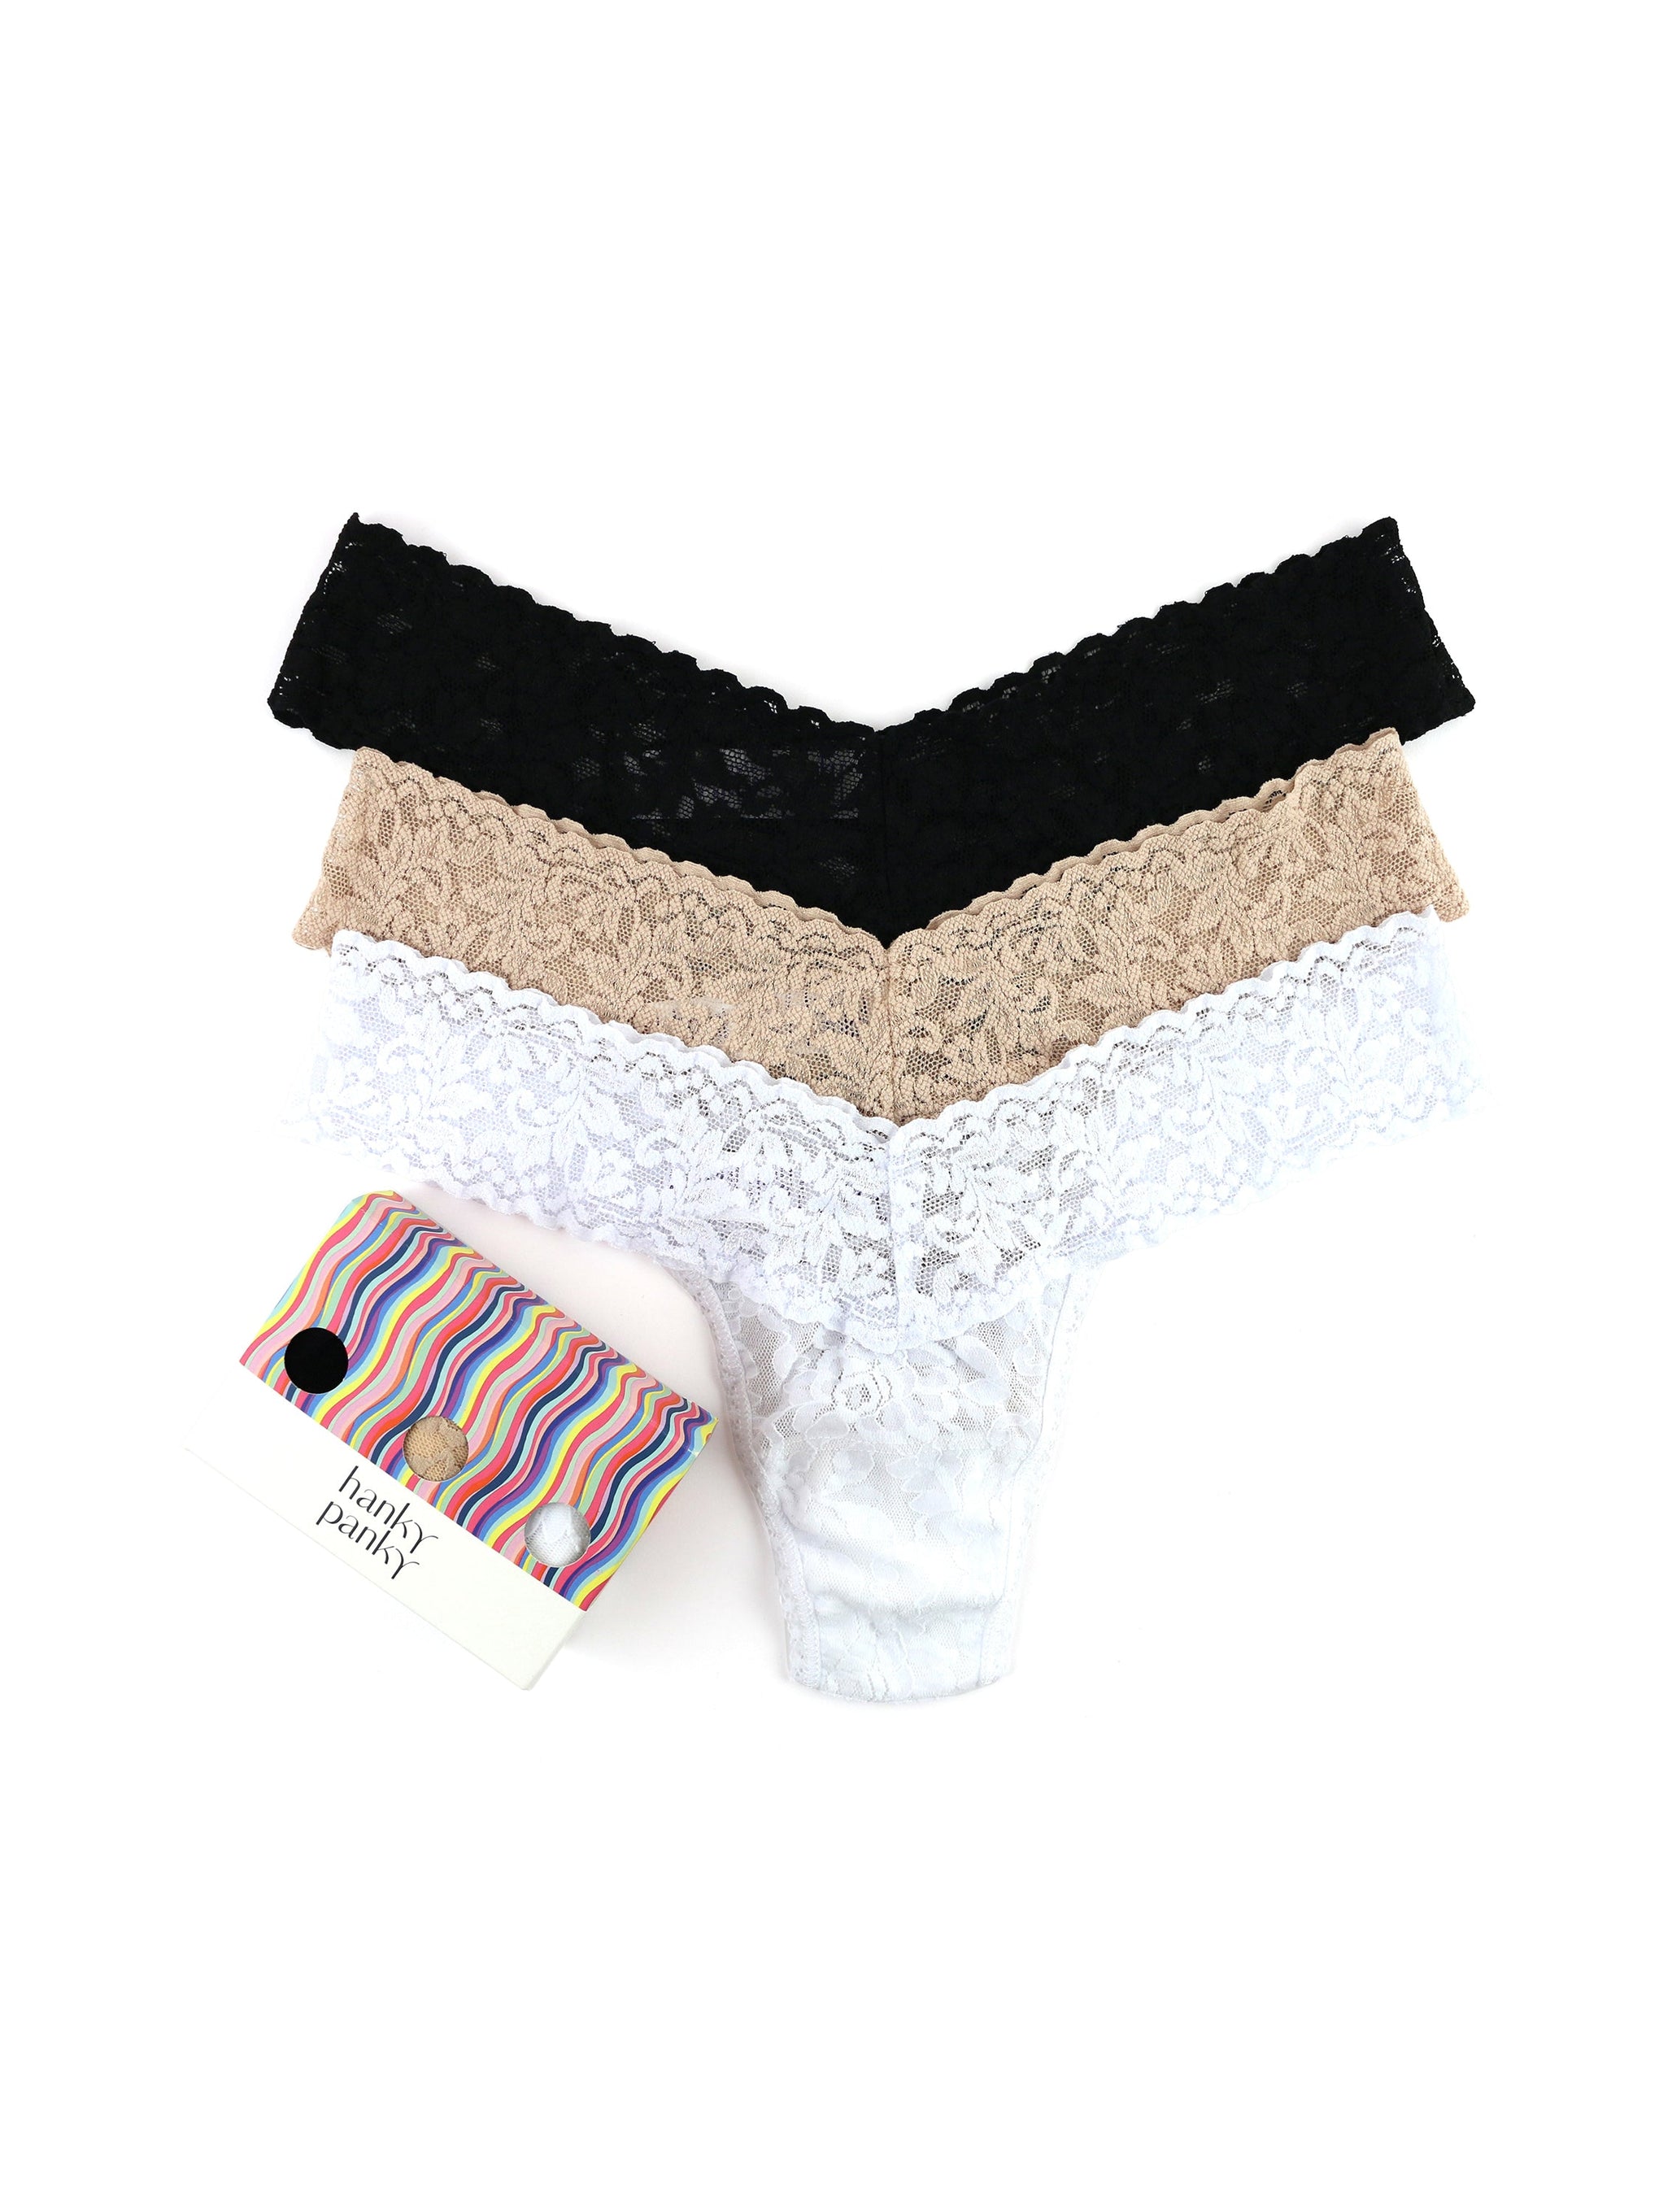 Lace Crotchless Thongs 3 Pack